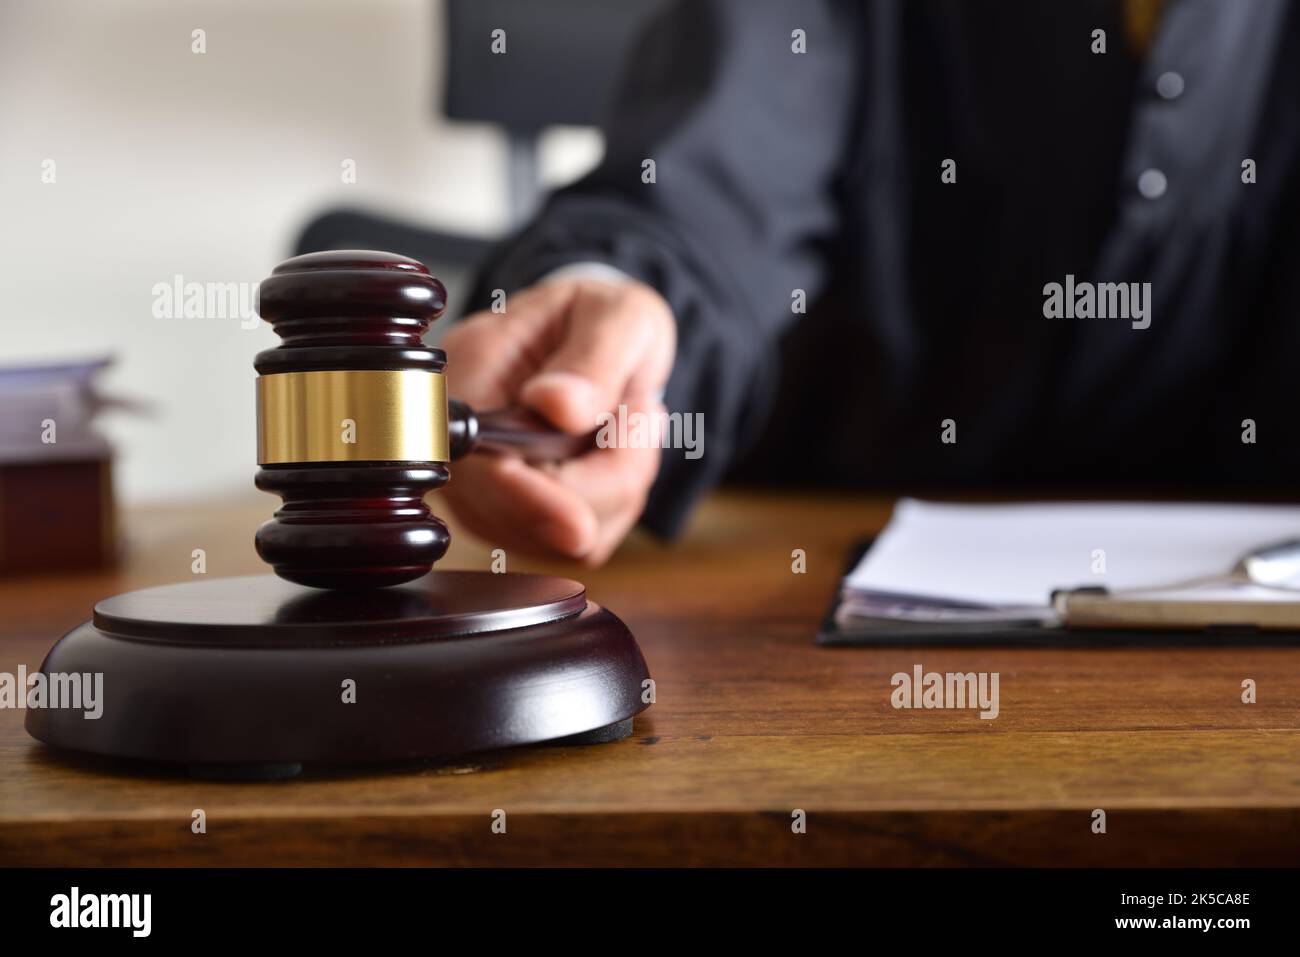 Detail of a judge passing sentence by hitting with the gavel on a wooden table. Front view Stock Photo